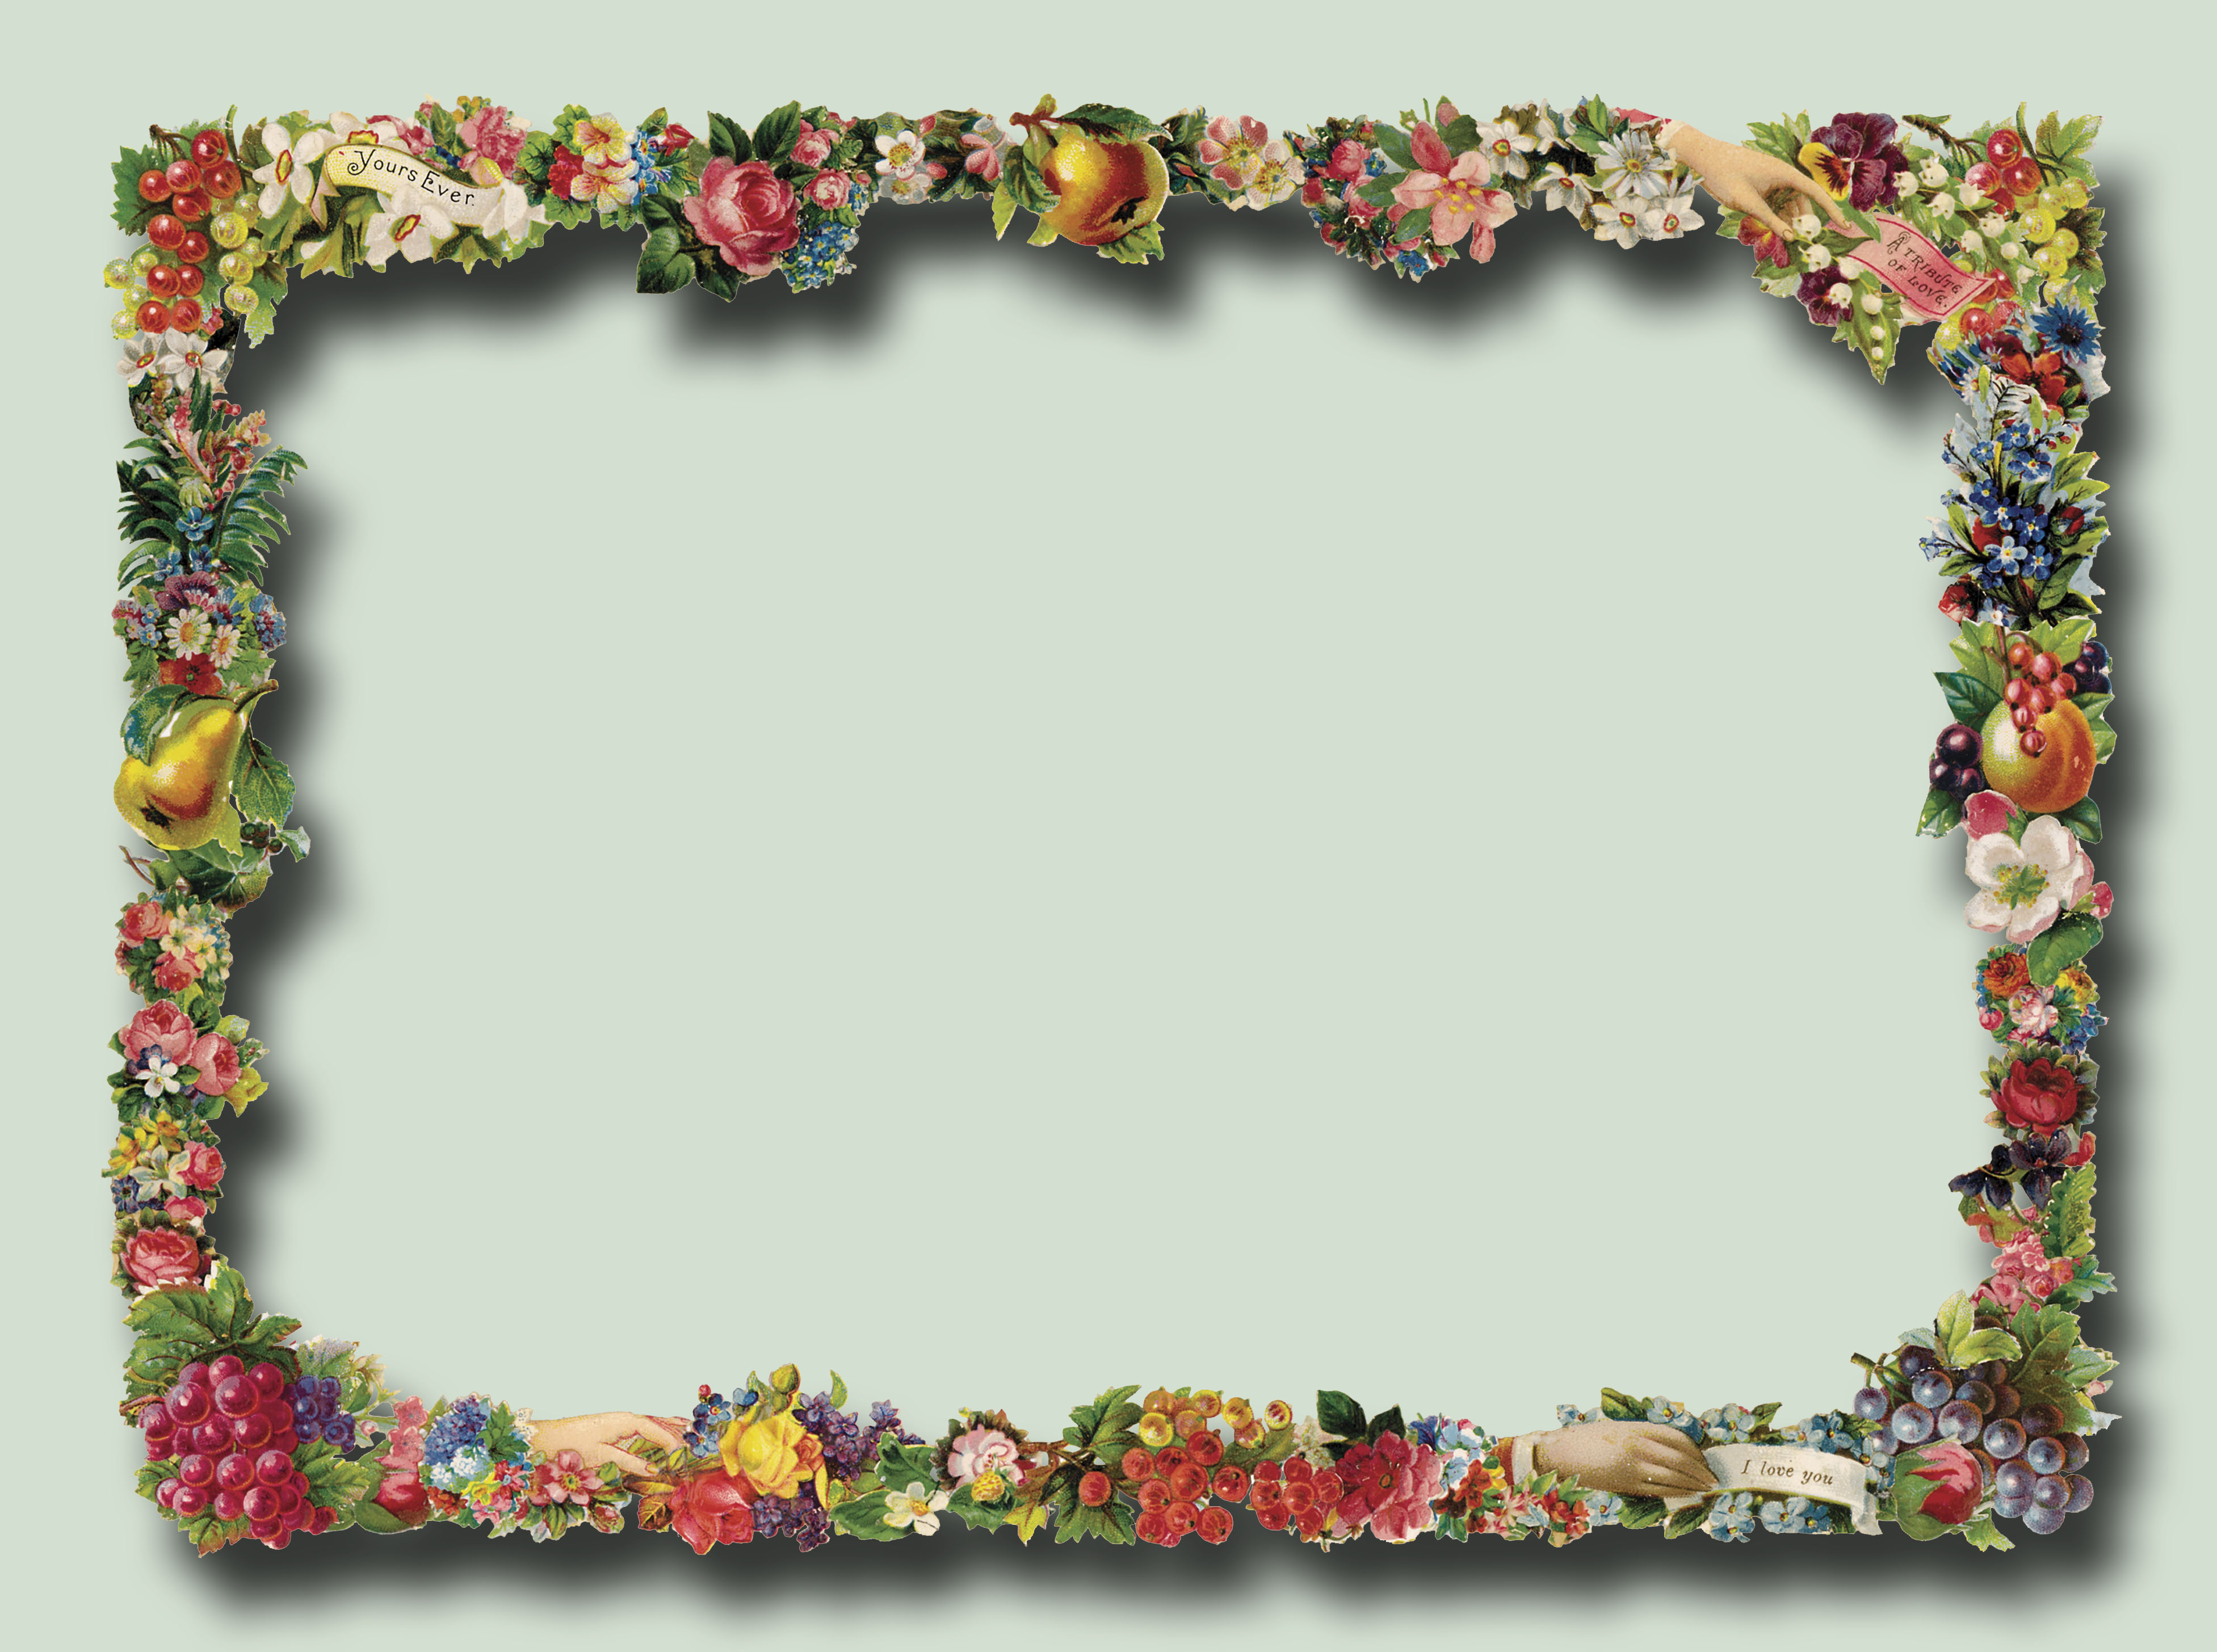 5673-border-png-frames-for-photoshop-freemockup-images-and-photos-finder